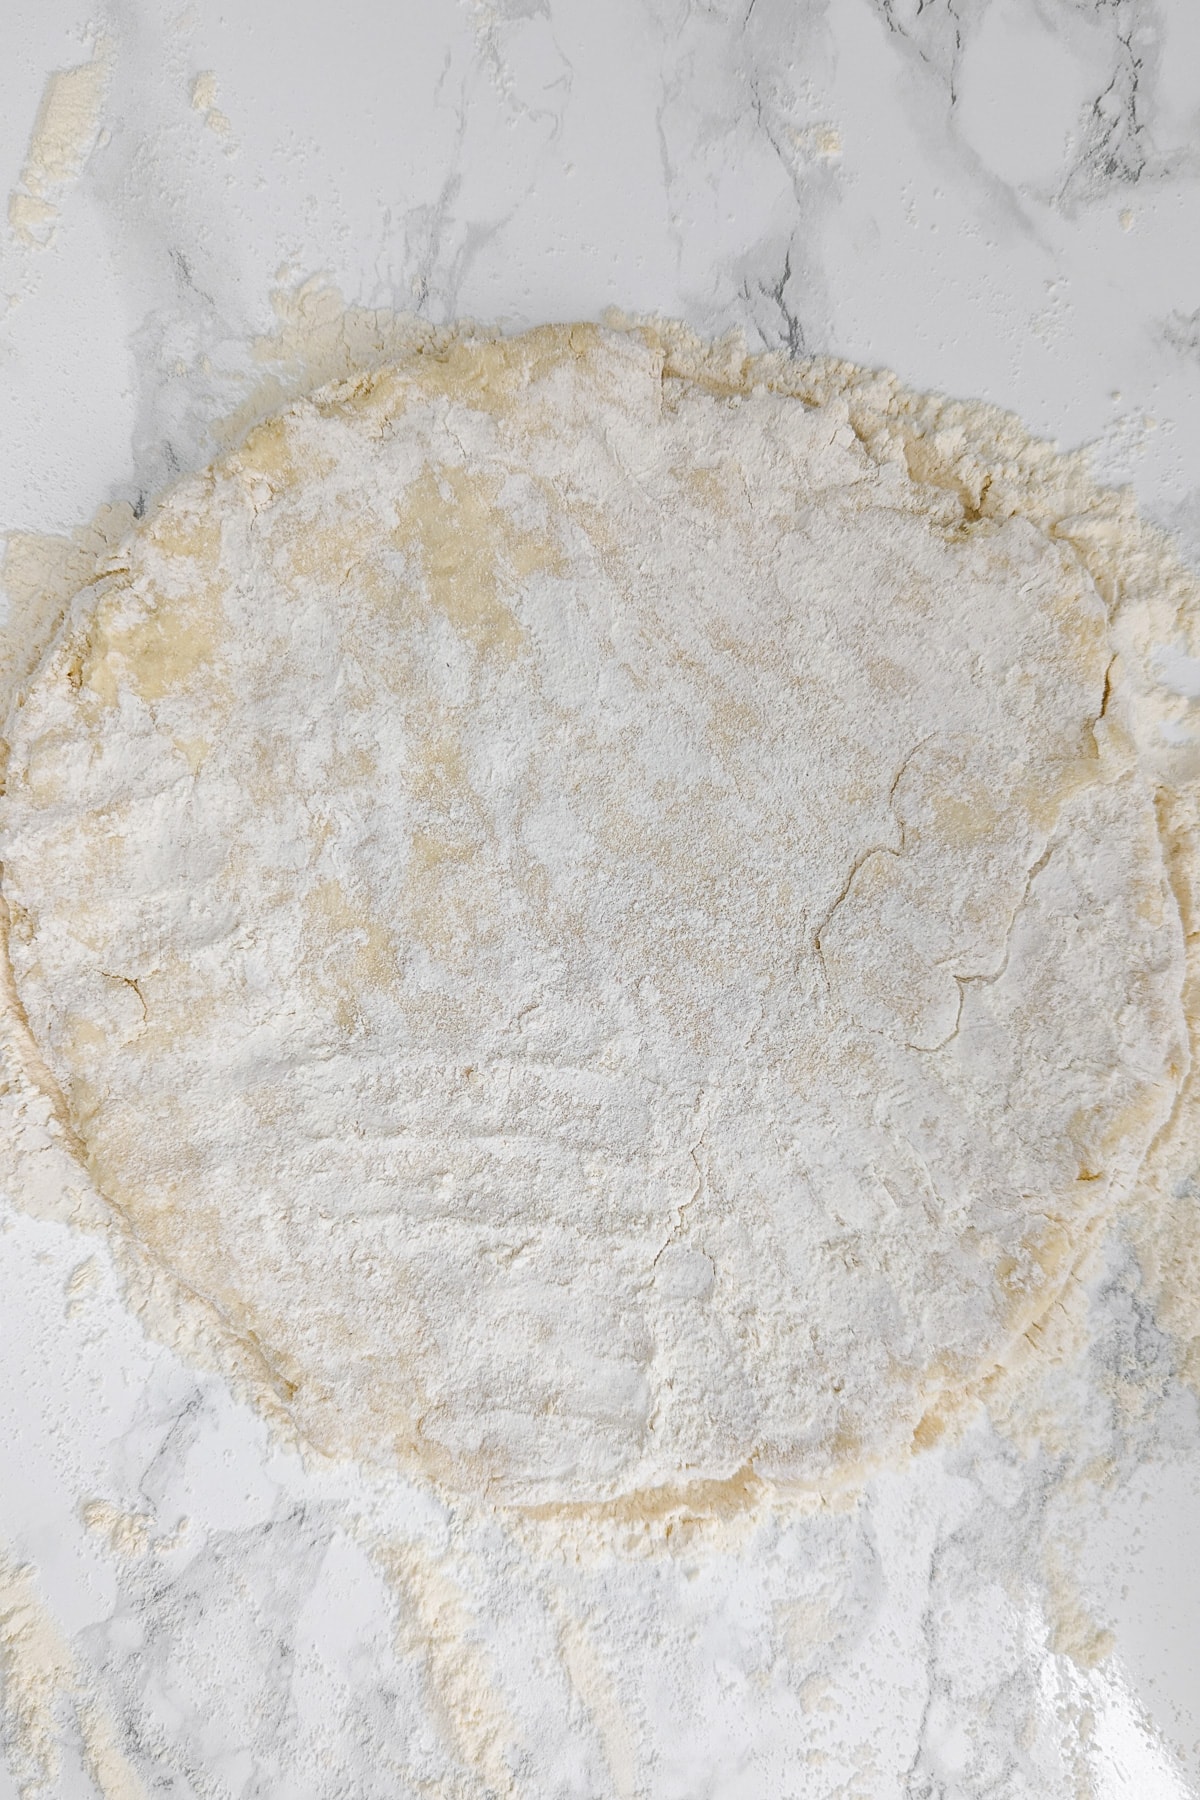 Rounded piece of dough on a white marble table covered with flour.